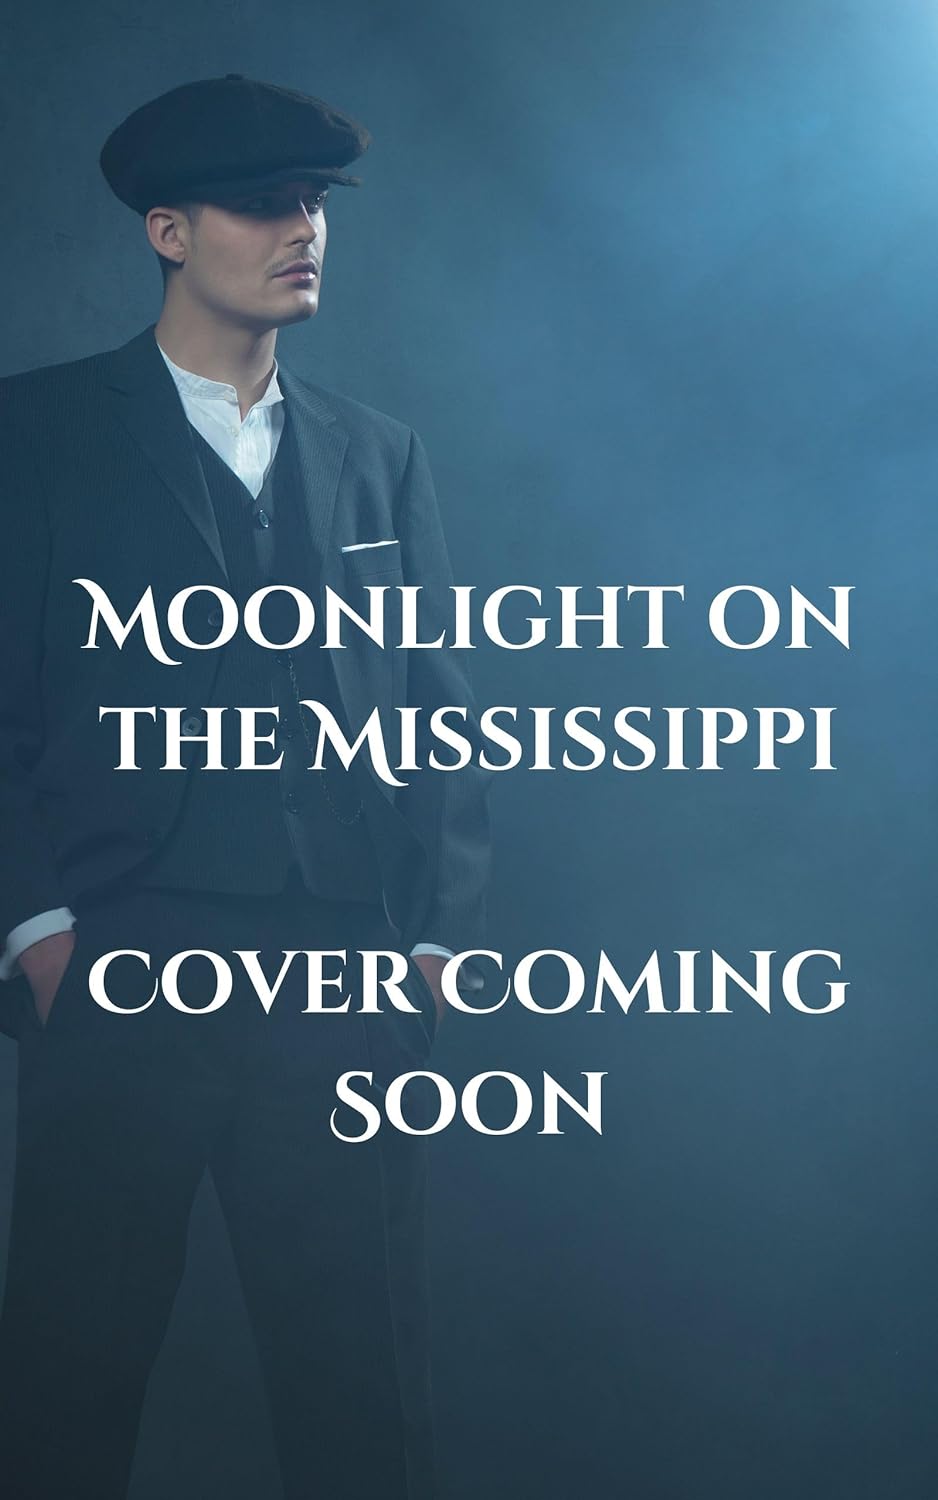 Moonlight on the Mississippi - coming soon Stephenia H. McGee